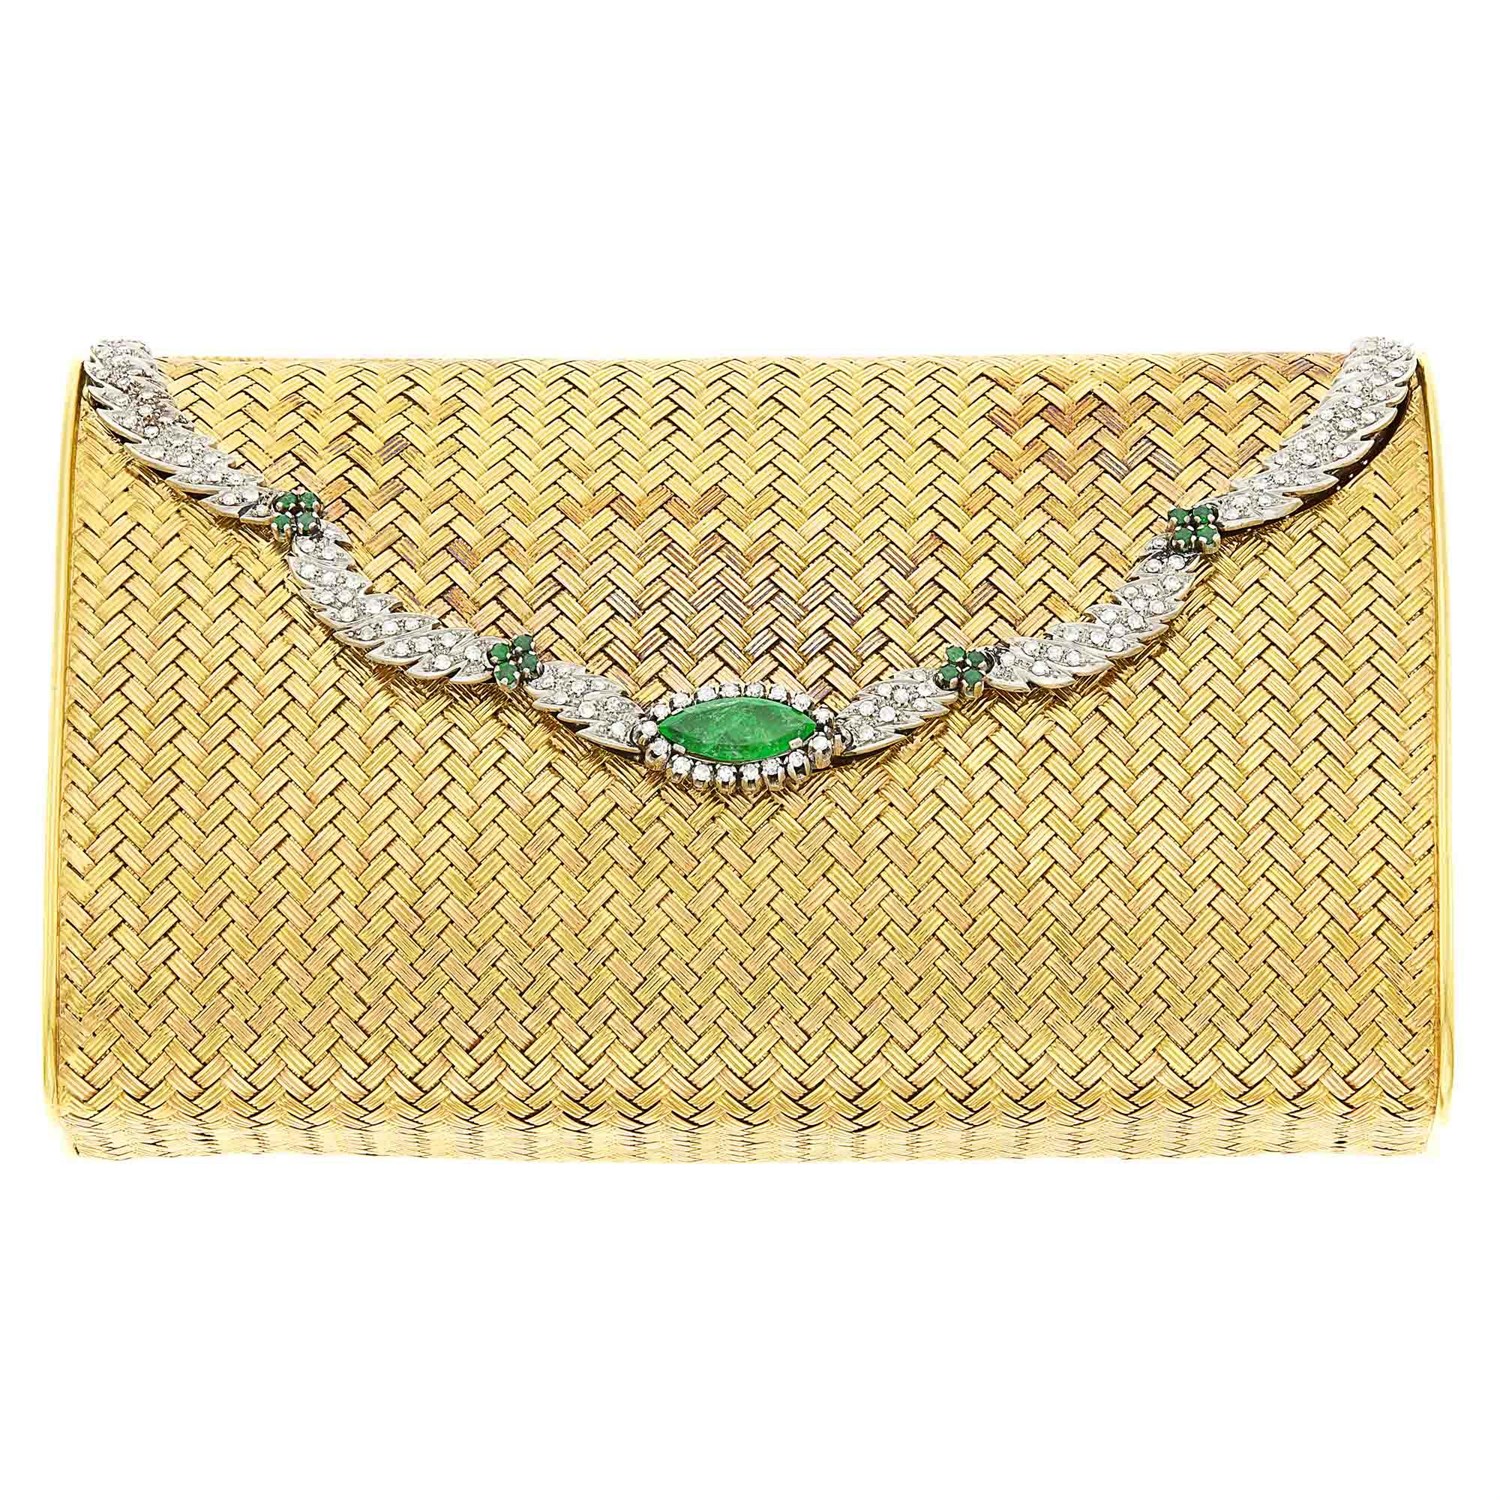 Lot 101 - Two-Color Woven Gold, Platinum, Diamond and Emerald Clutch